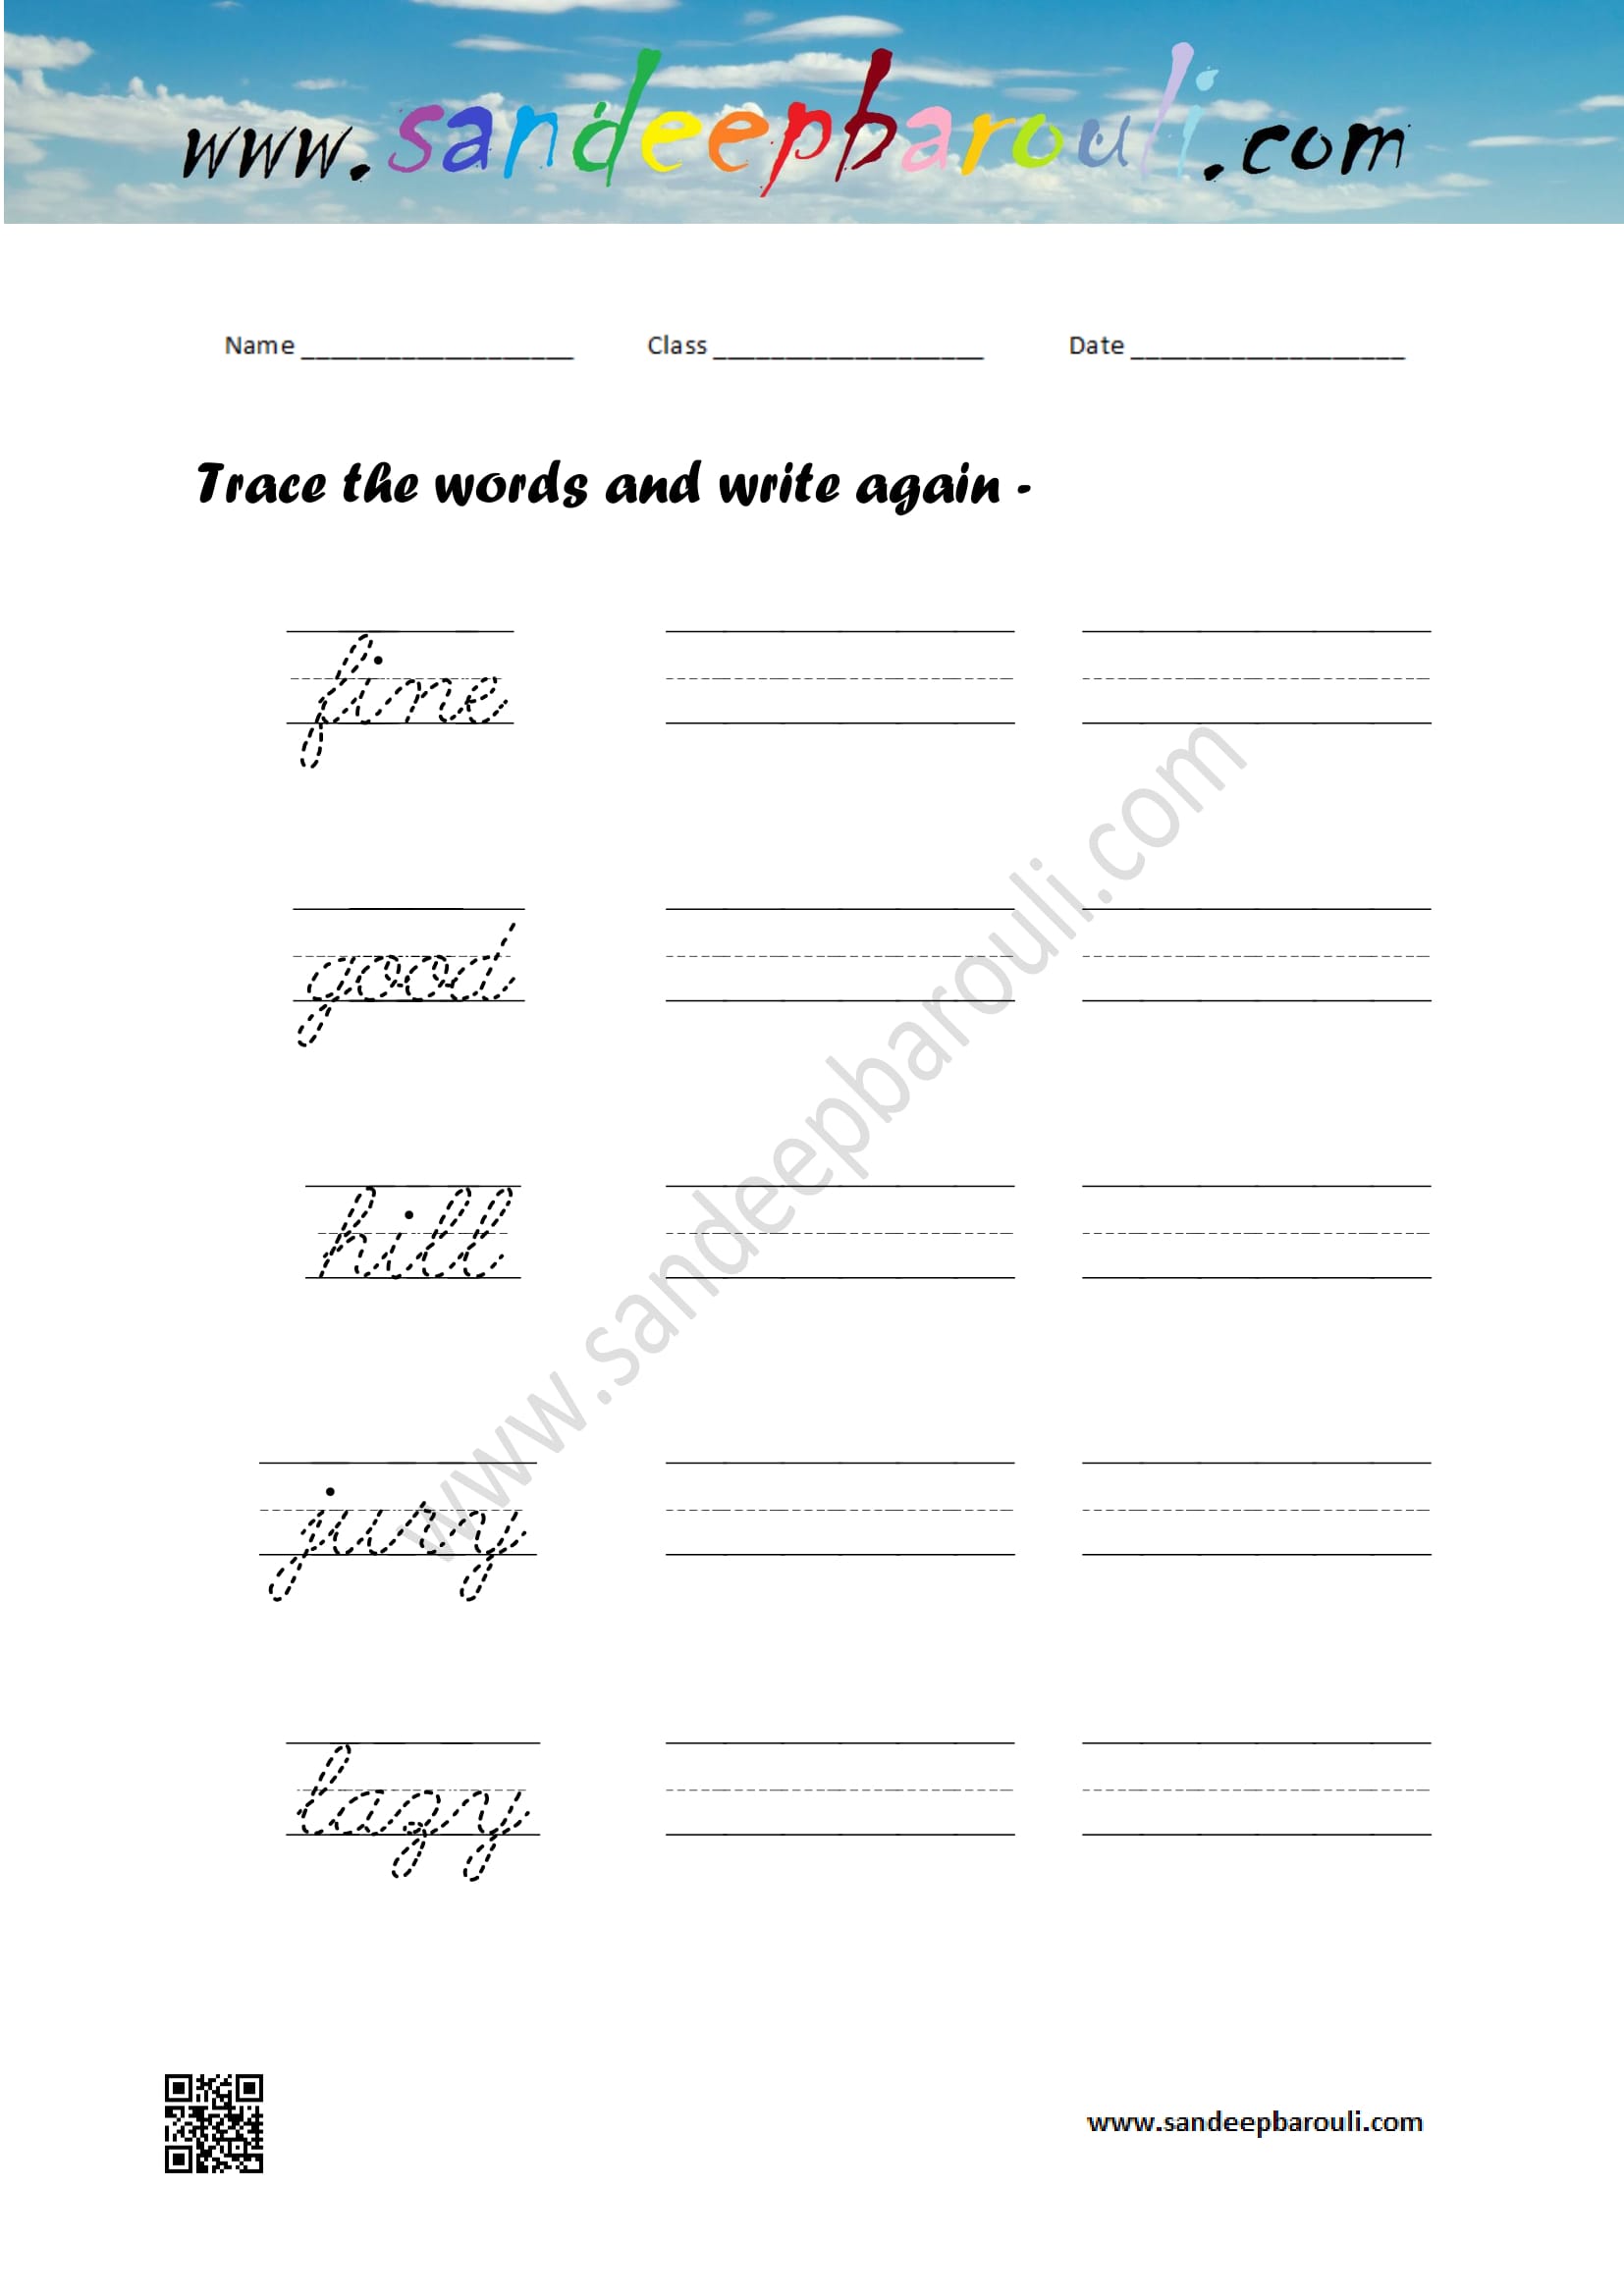 Cursive writing worksheet – trace the words and write again (73)